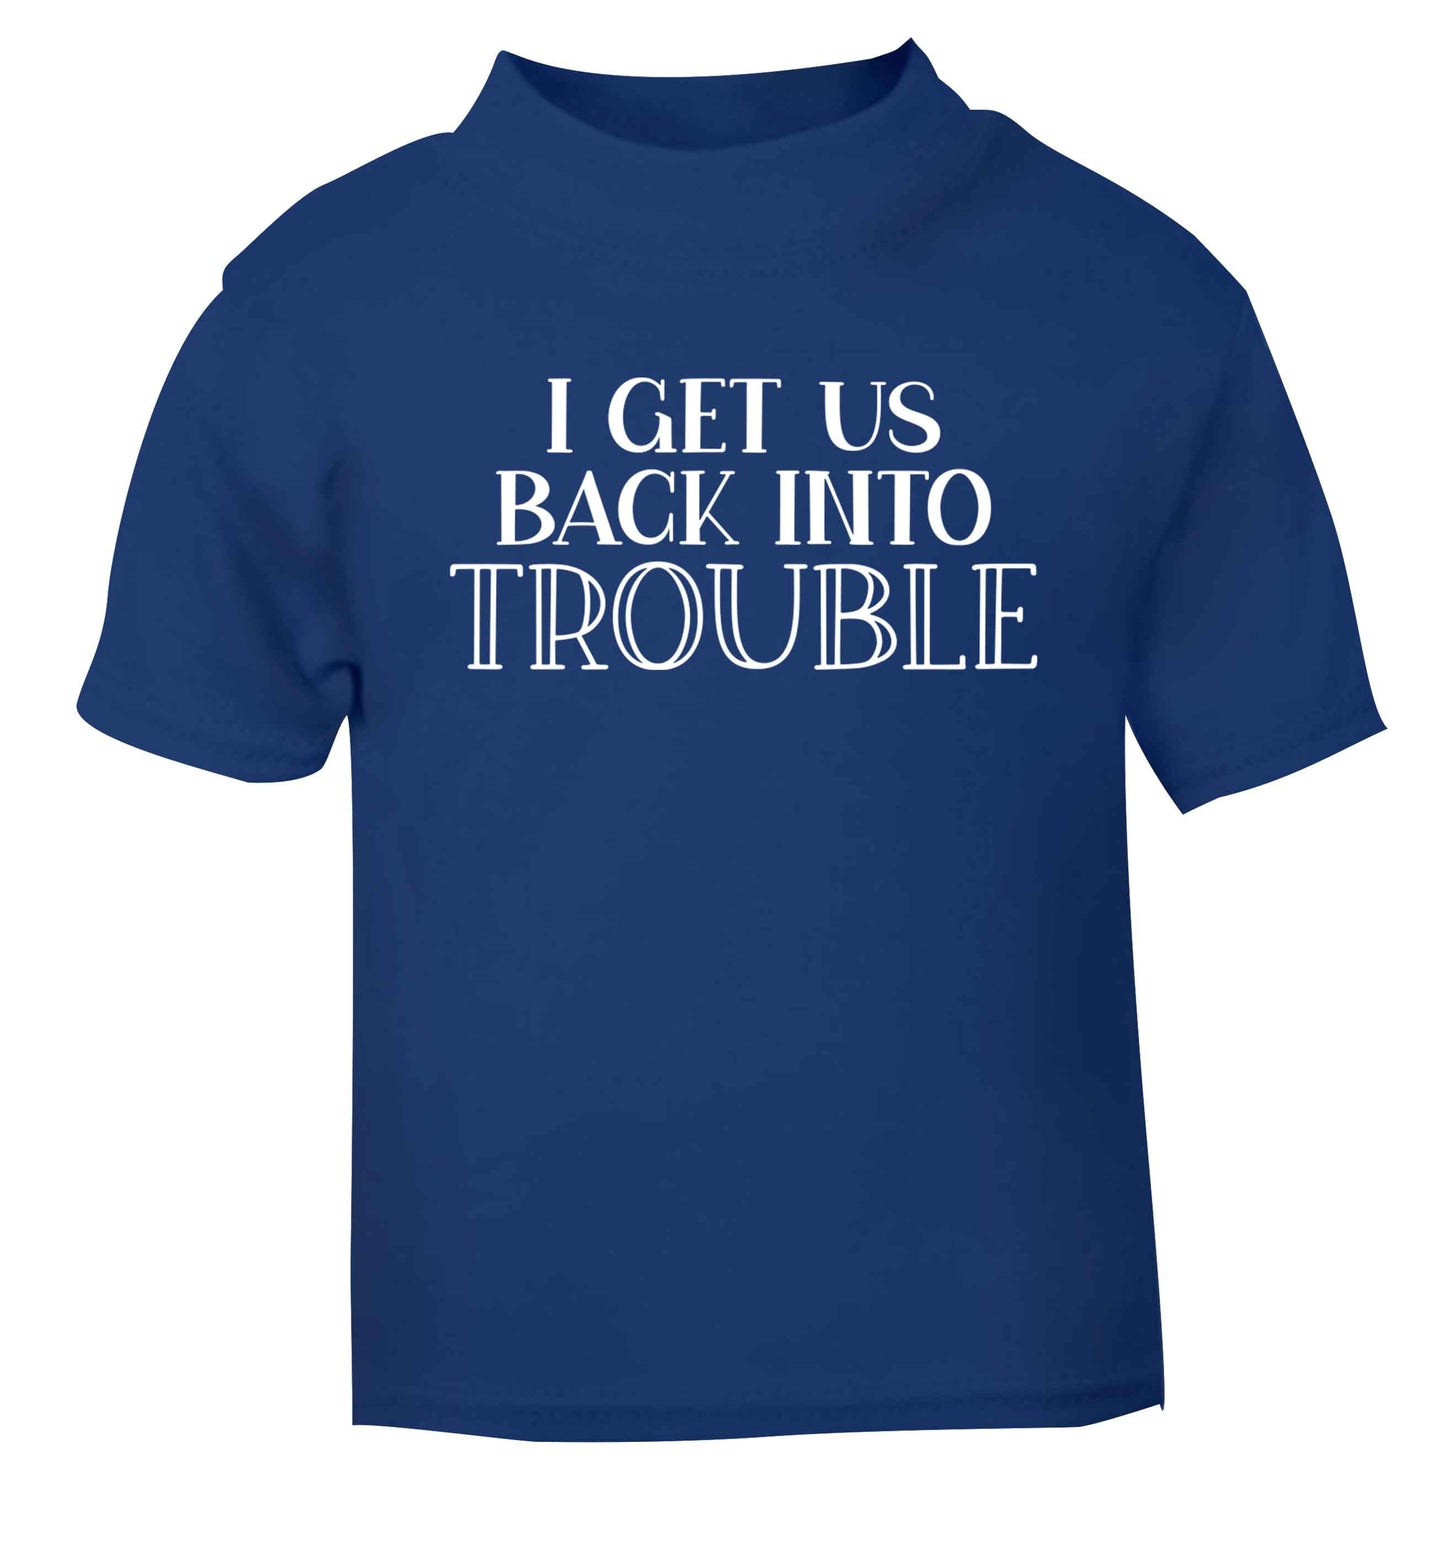 I get us back into trouble blue baby toddler Tshirt 2 Years